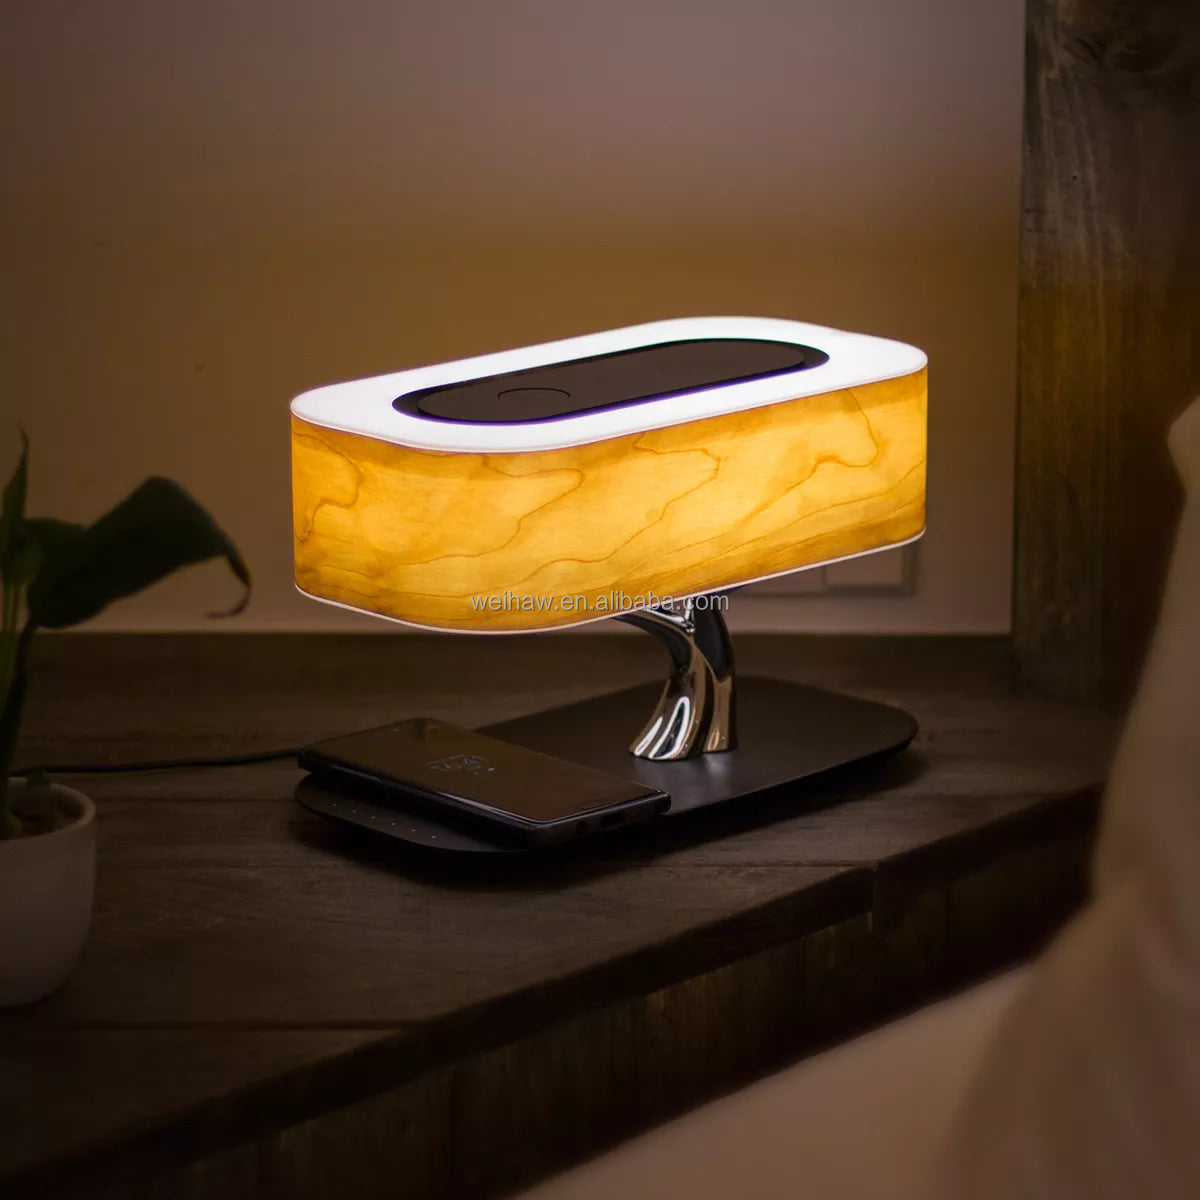 trendy-lamp-multifunctional-lamp-wireless-charger-blue-tooth-speaker-architect-desk-lamps-home-decorate-gadgets